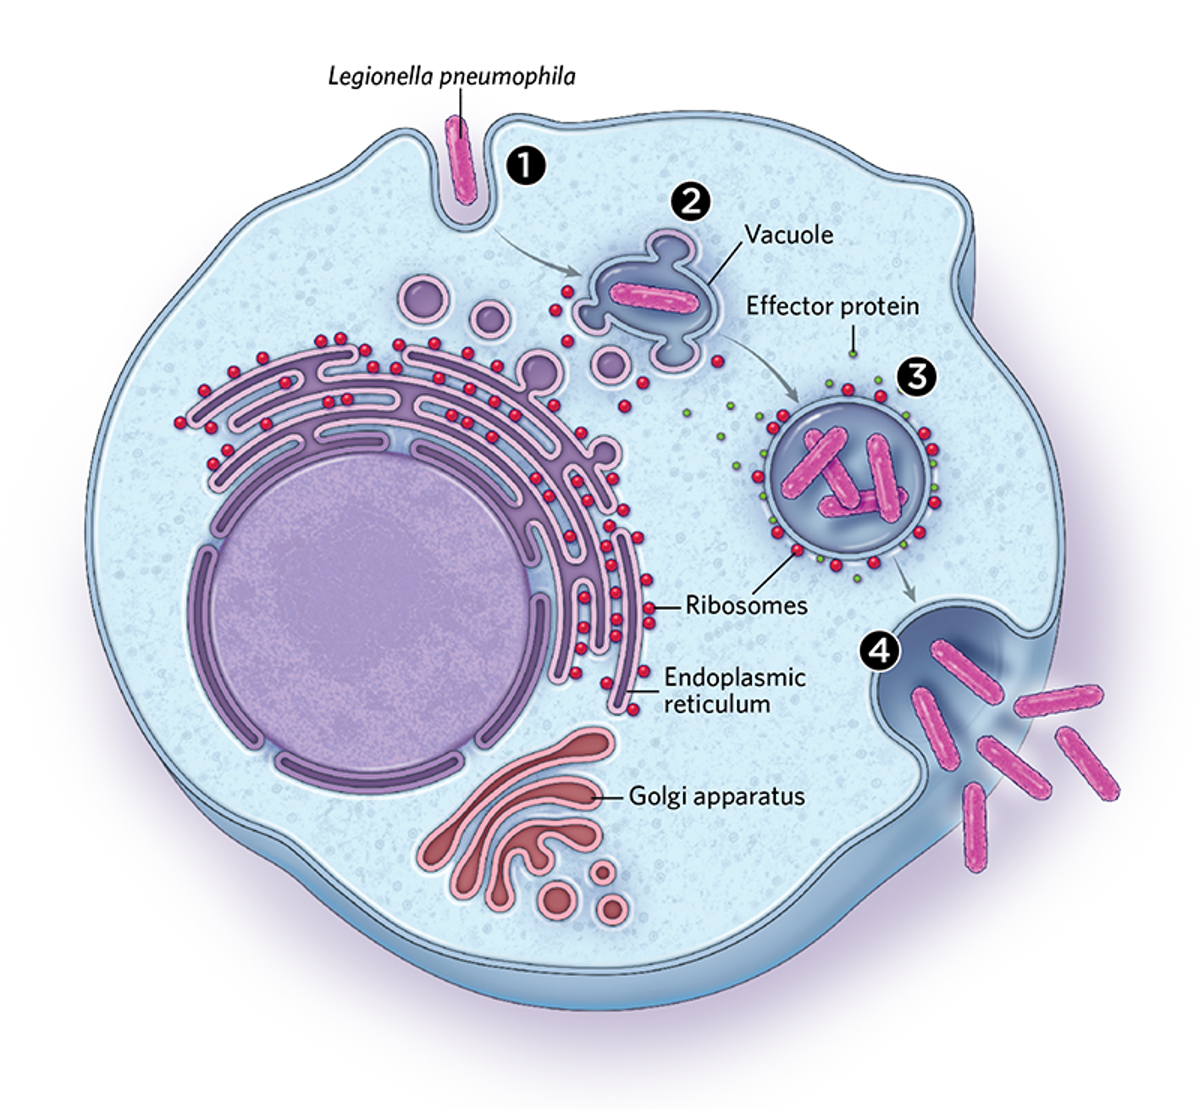 Illustration showing how some intracellular bacteria, such as Legionella pneumophila, inhabit membrane-bound compartments inside host cells